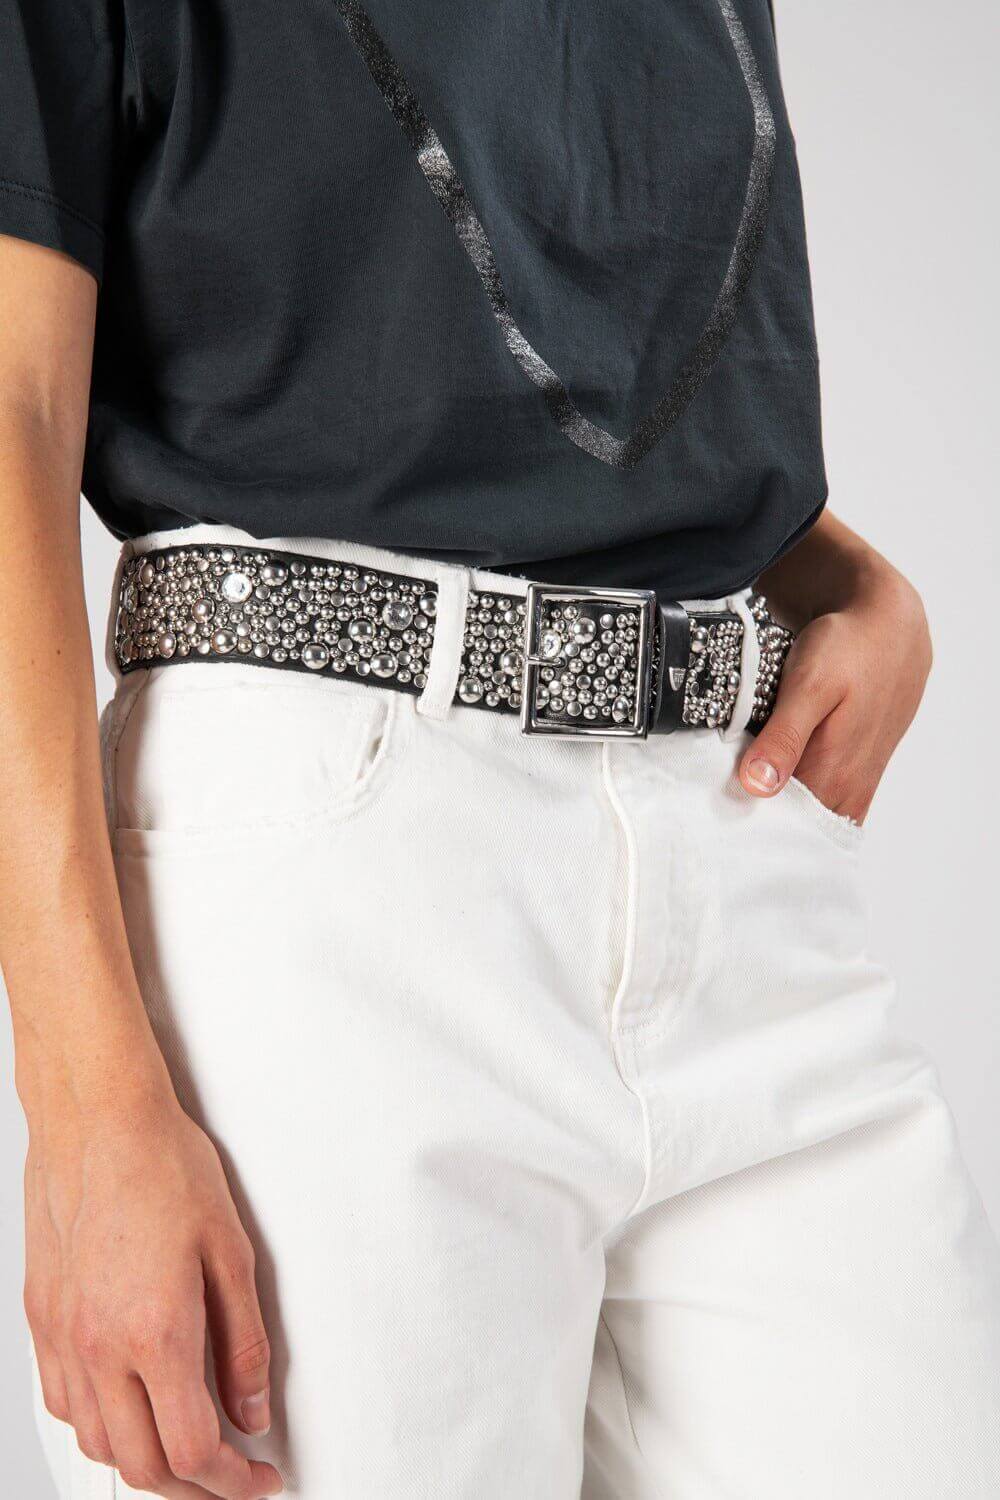 CHAOS BELT Leather belt with mixed studs, brass buckle, studded belt loop with HTC logo stud. Height: 4 cm HTC LOS ANGELES